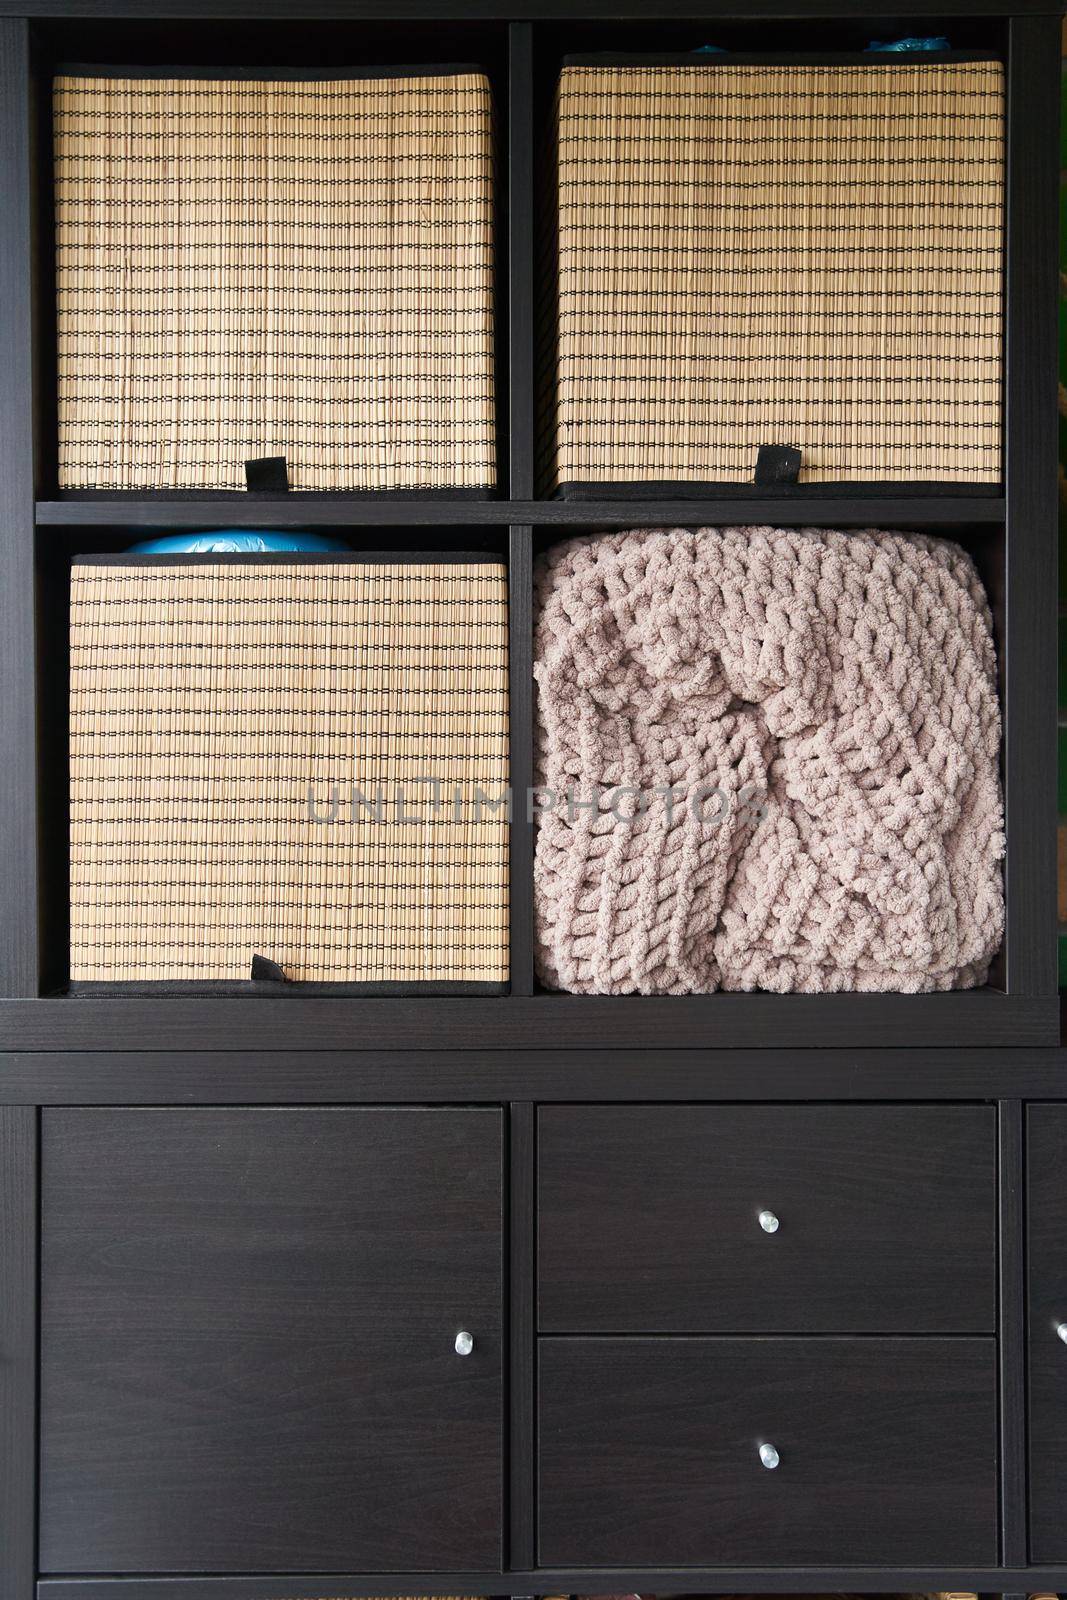 Wicker boxes for things on the shelves. Wardrobe for storage of things by driver-s